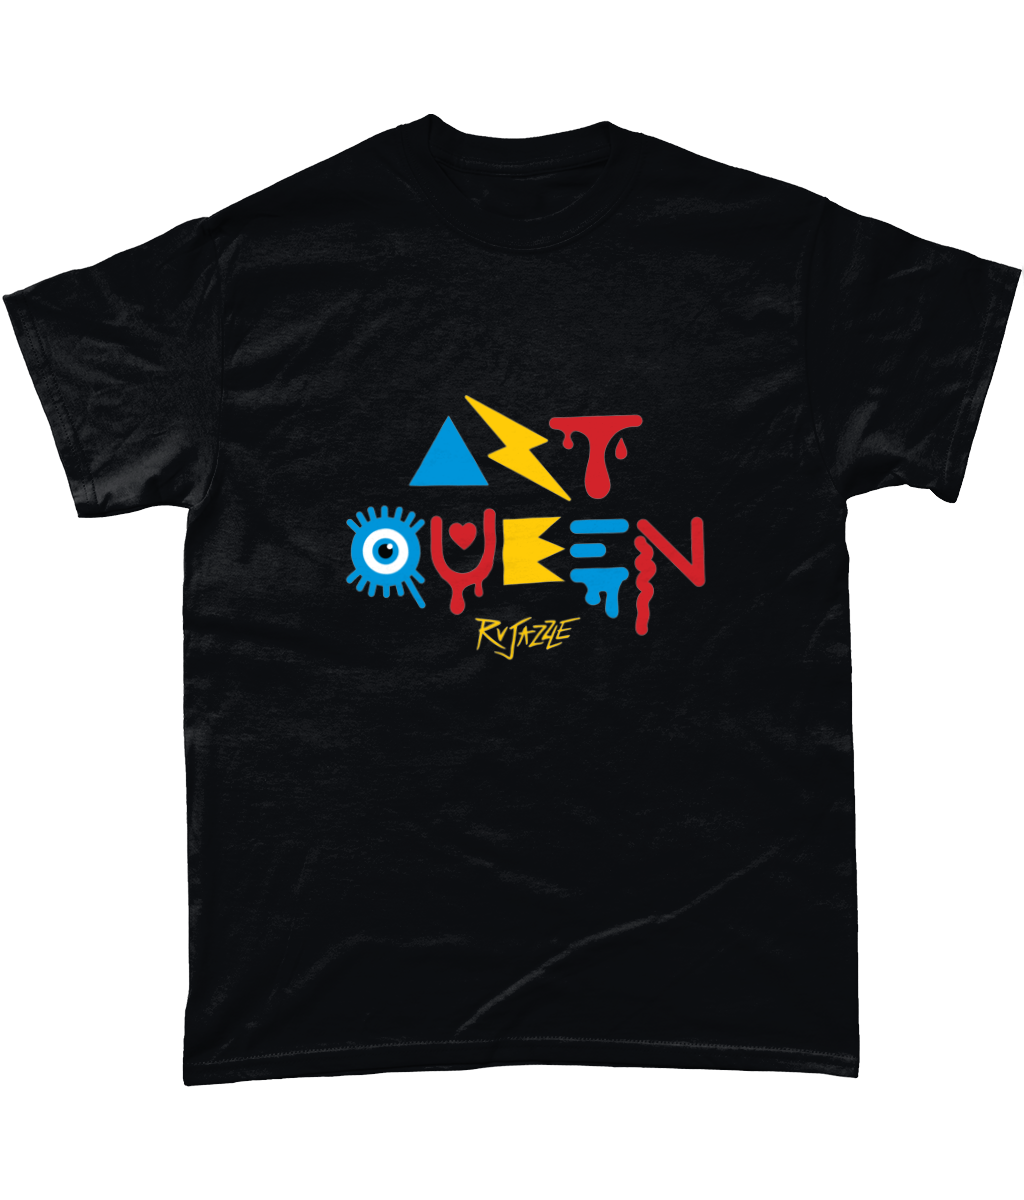 Rujazzle - Art Queen T-Shirt - SNATCHED